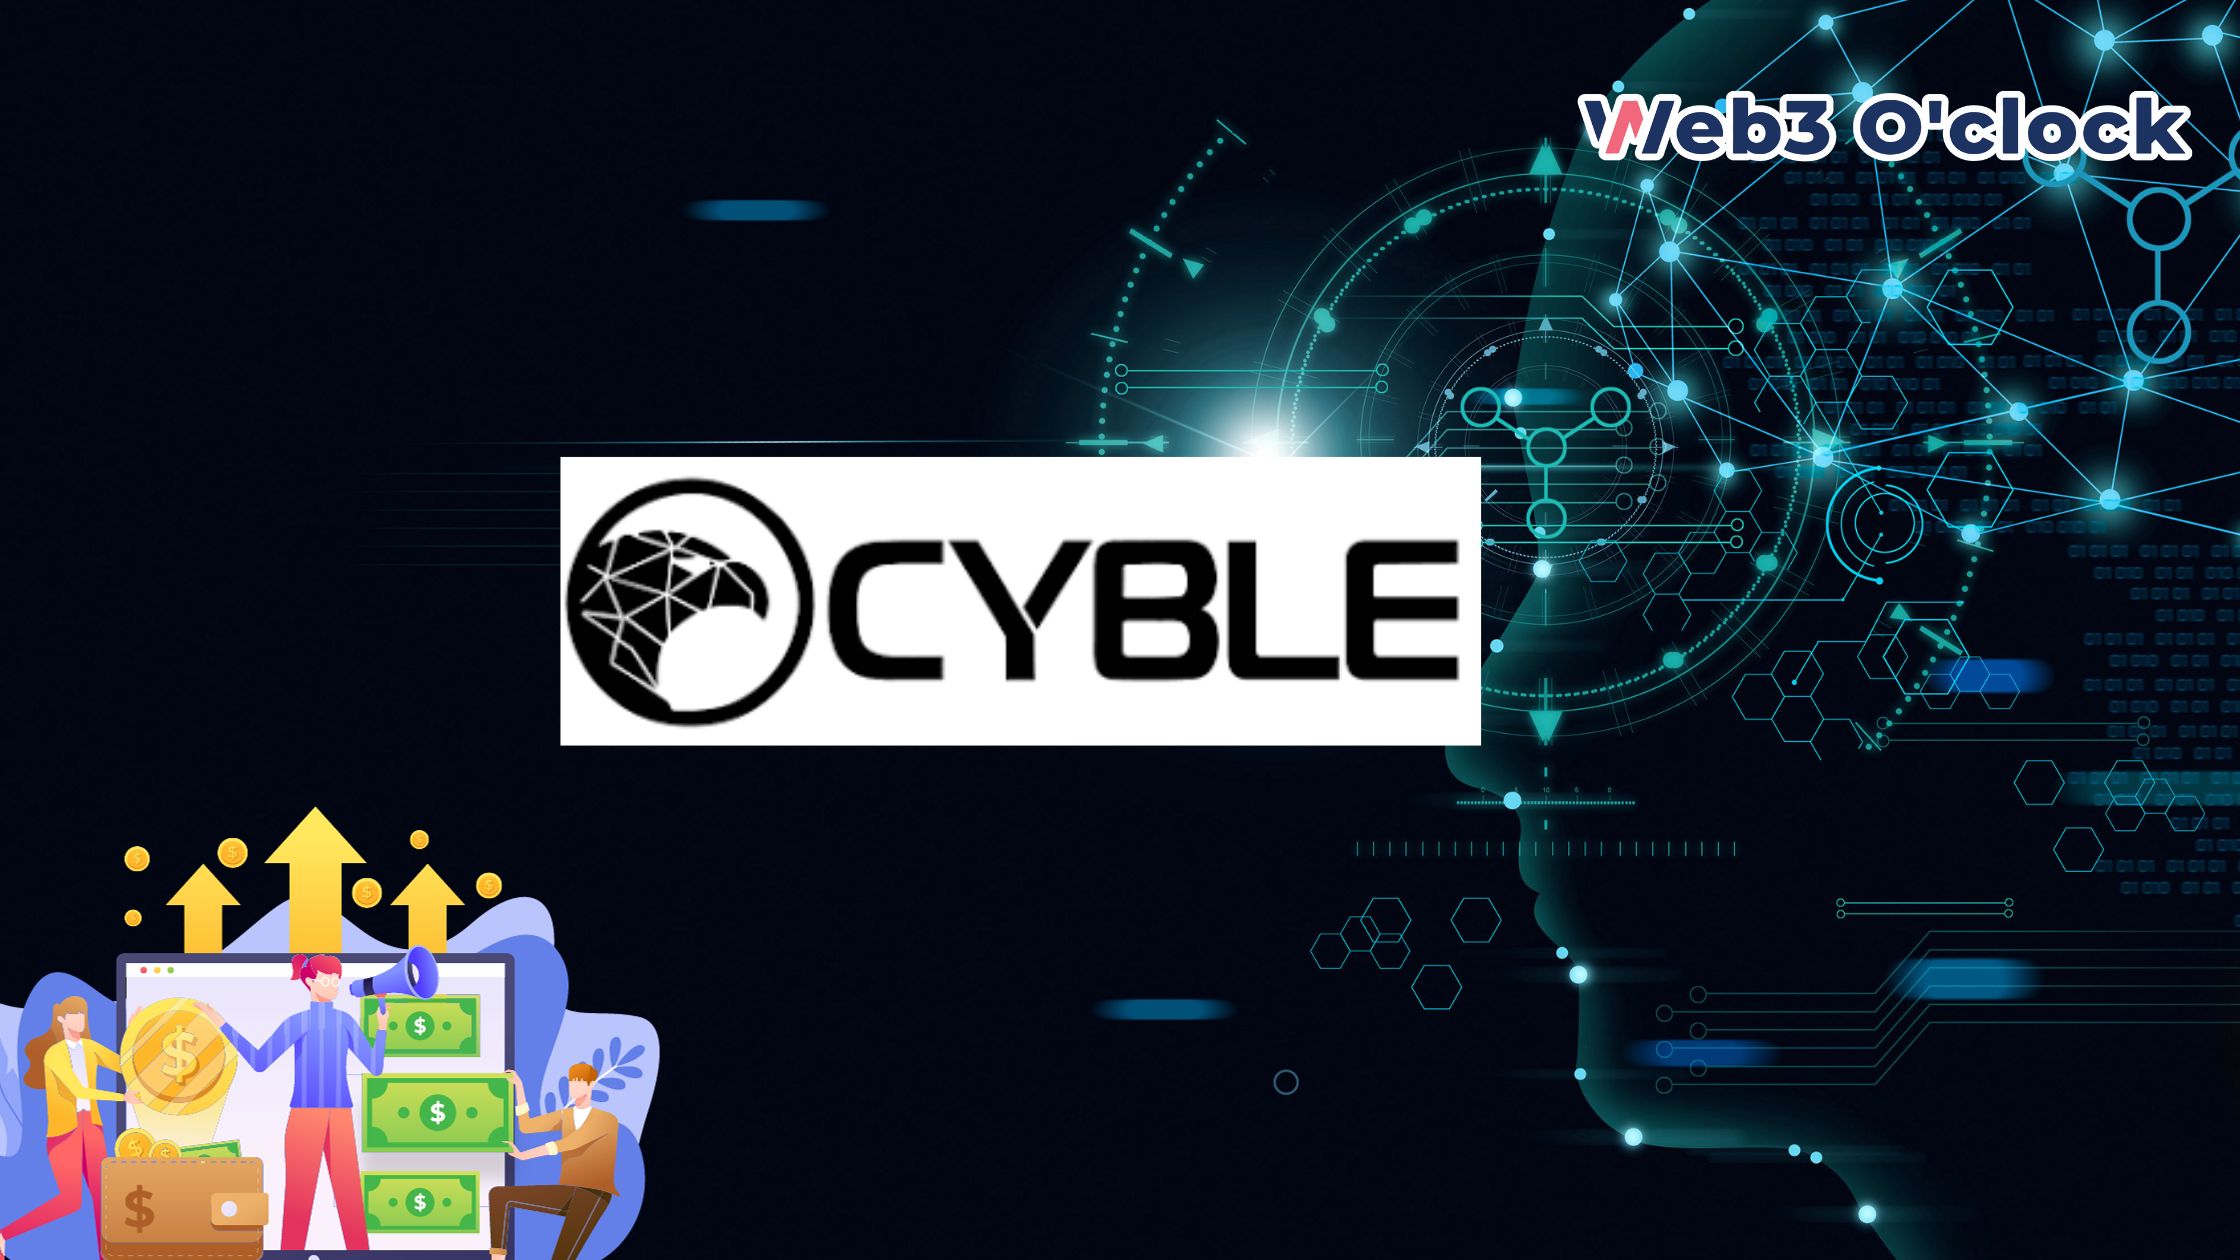 Cyble Secures $30.2 Million by web3oclock